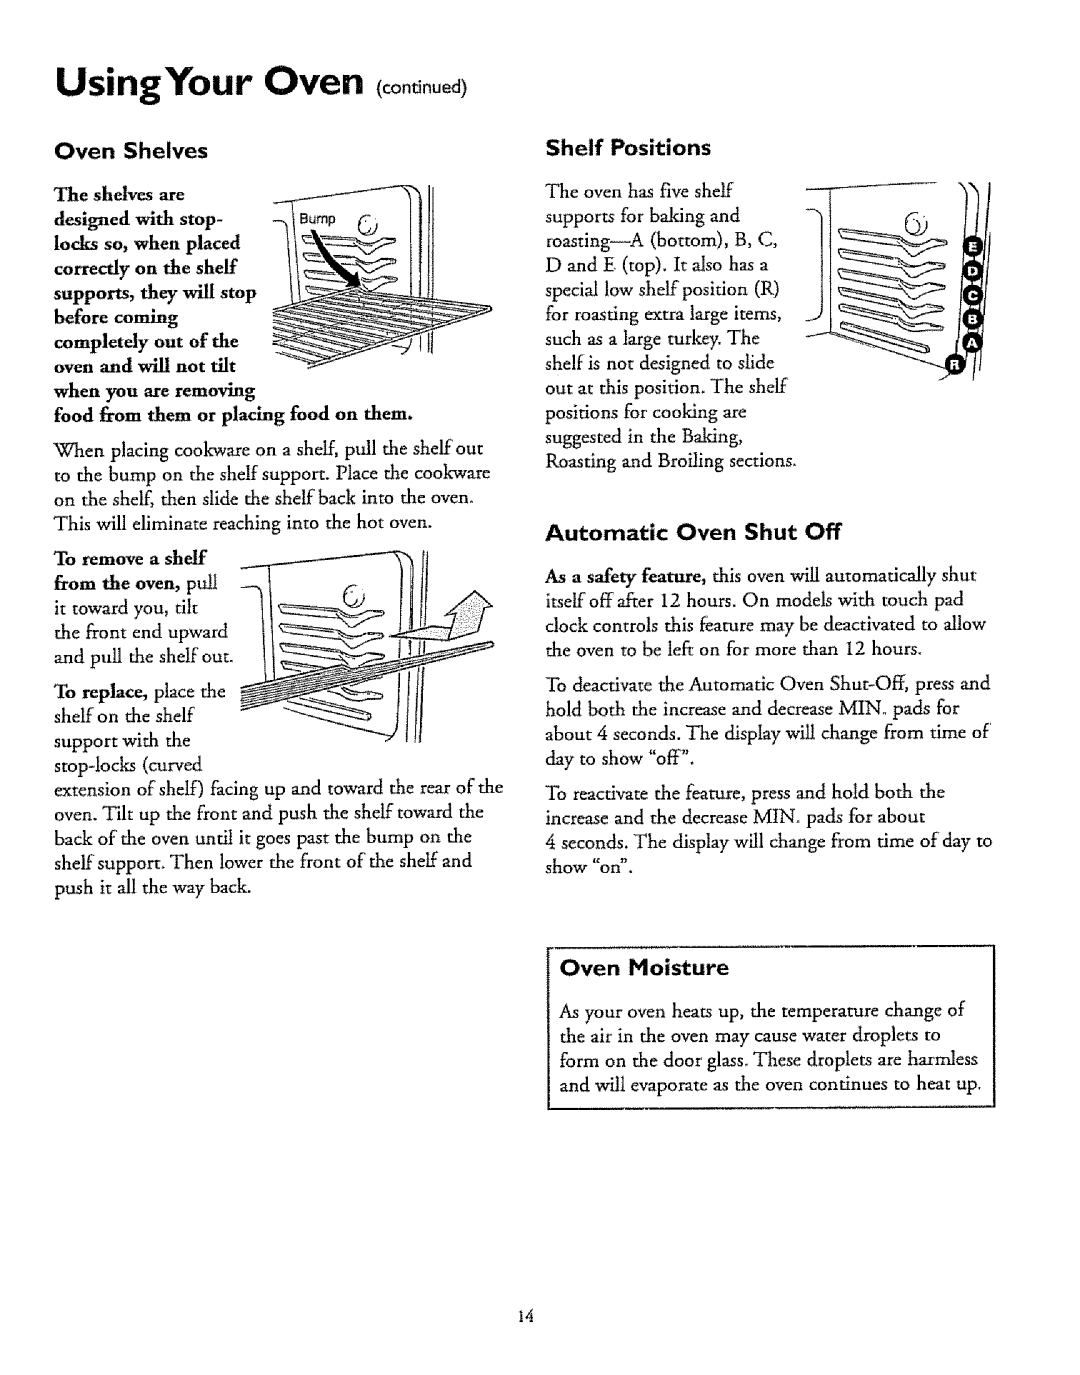 Sears 75575 UsingYour Oven co0 n00d, Shelf Positions, and ptfll the shelf out, the front end upward, To replace, place the 